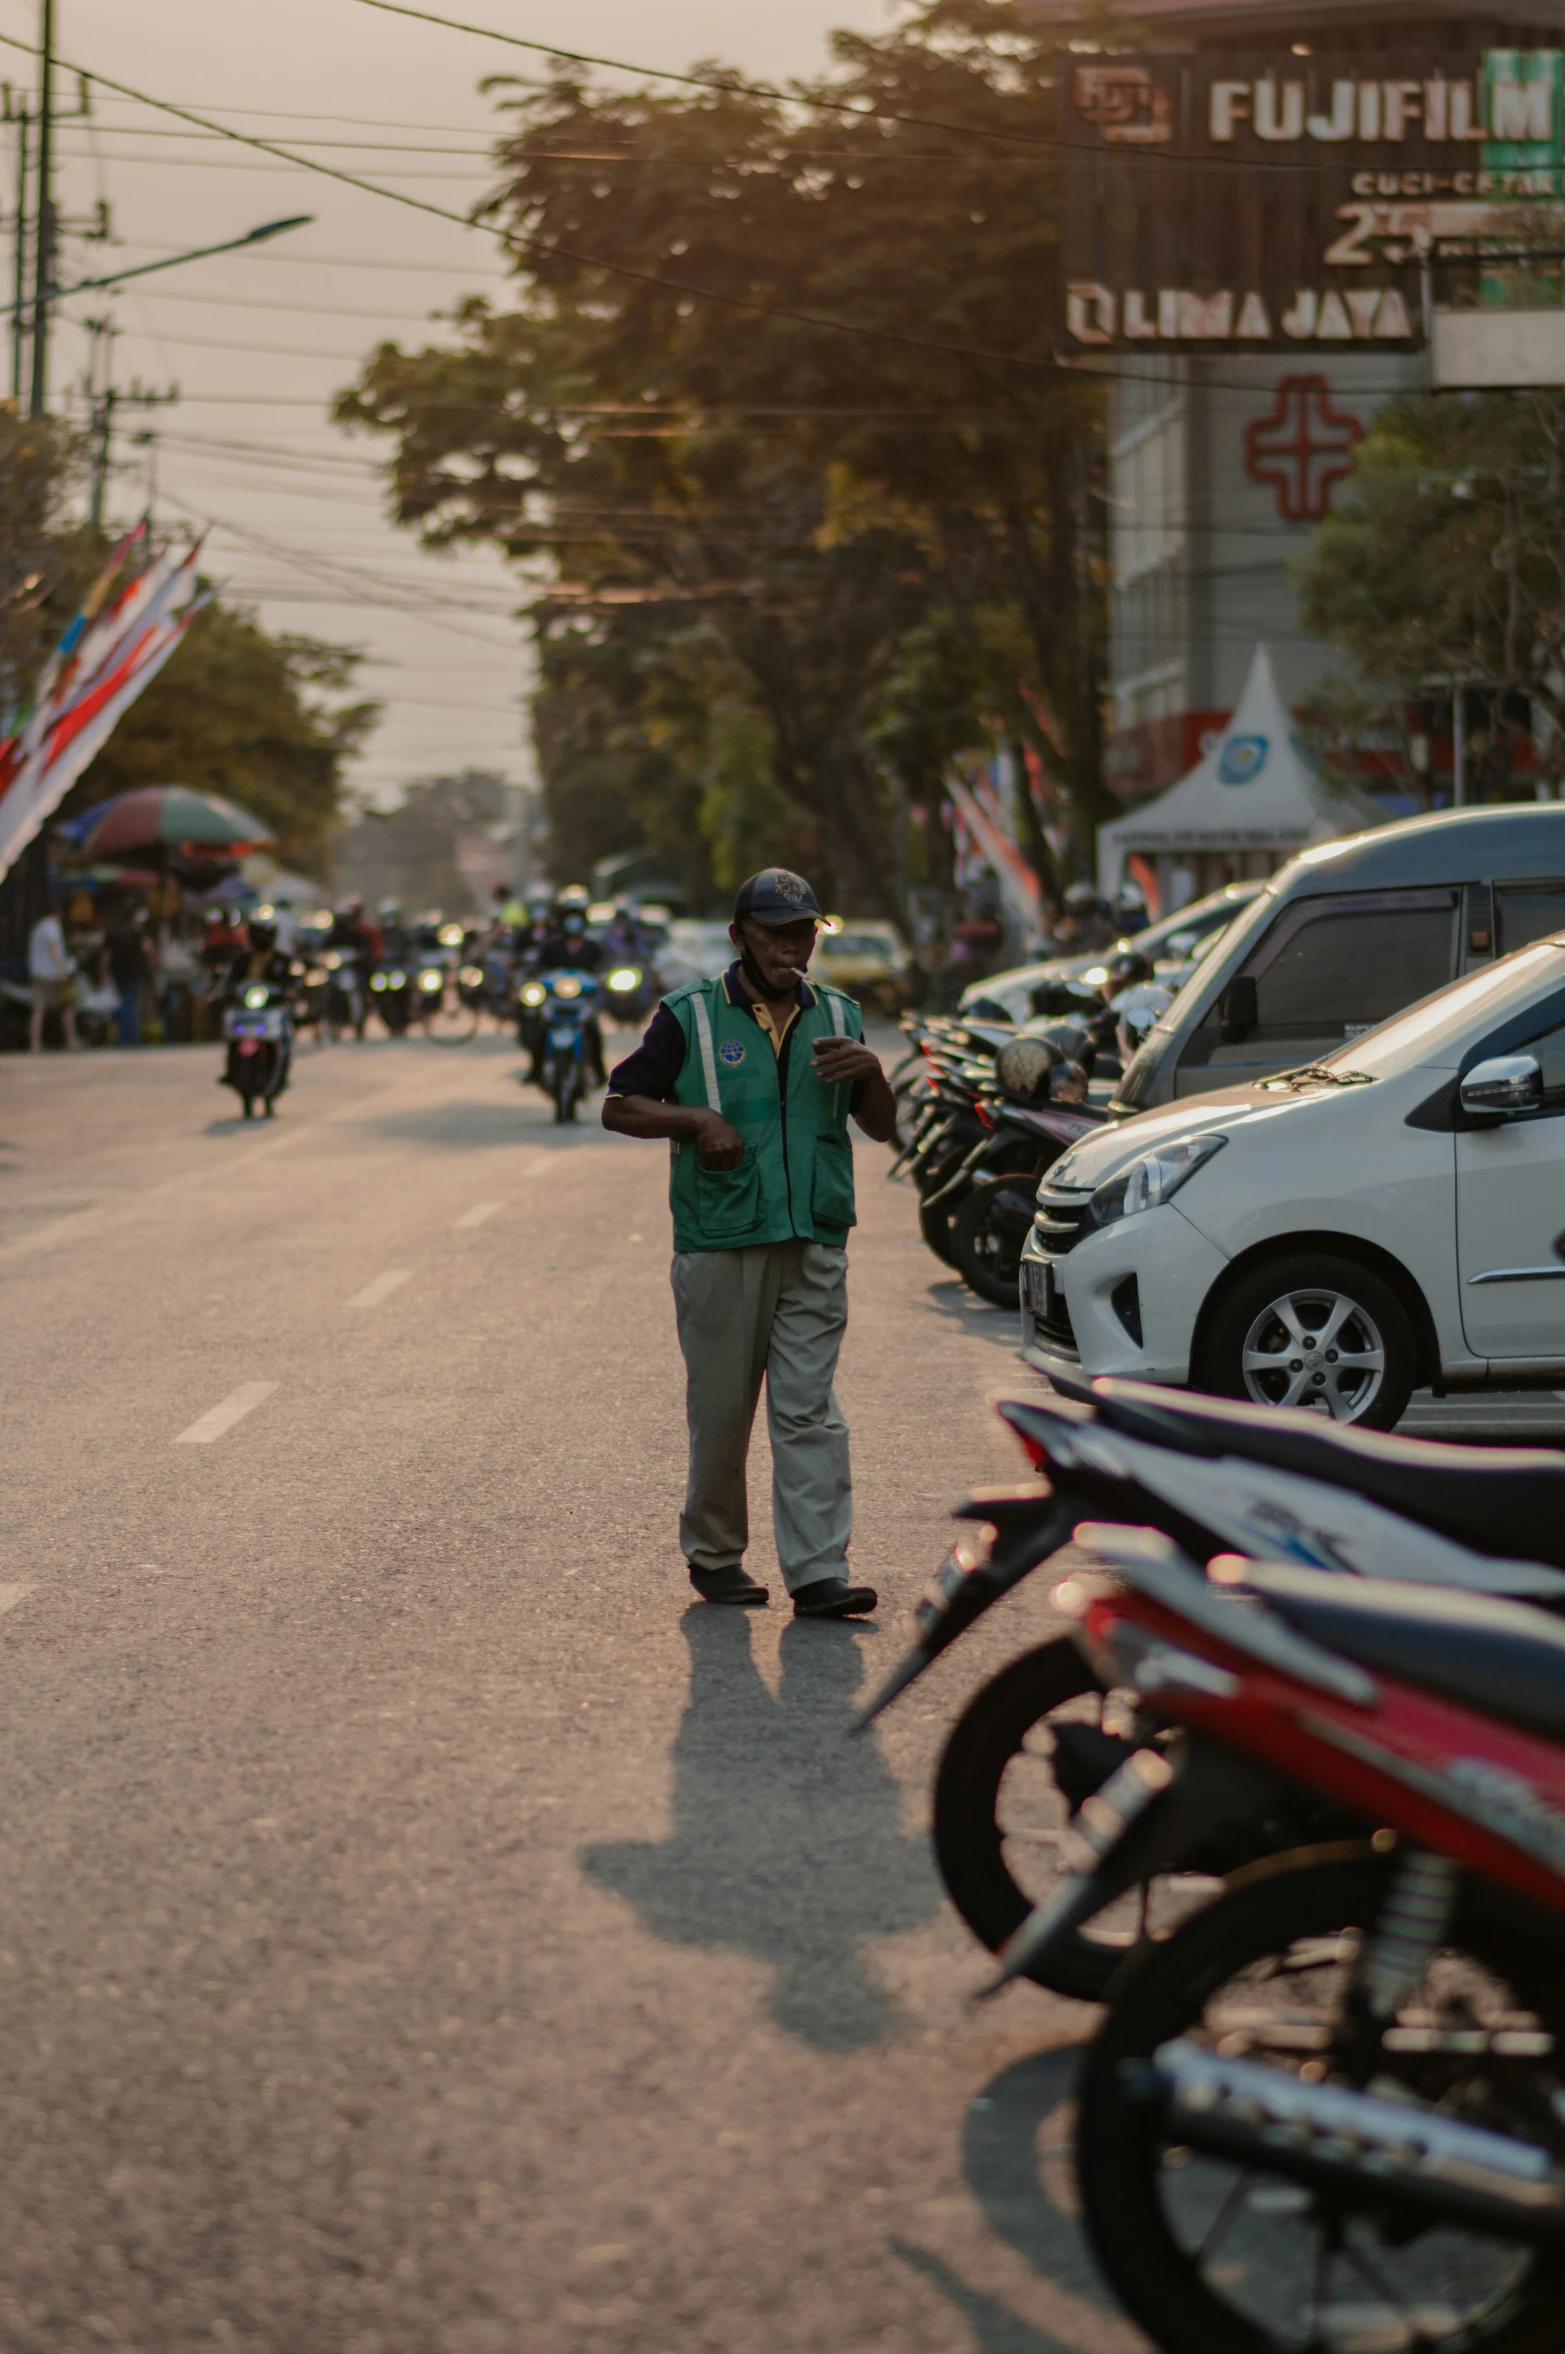 a man is on the street next to many parked motorcycles